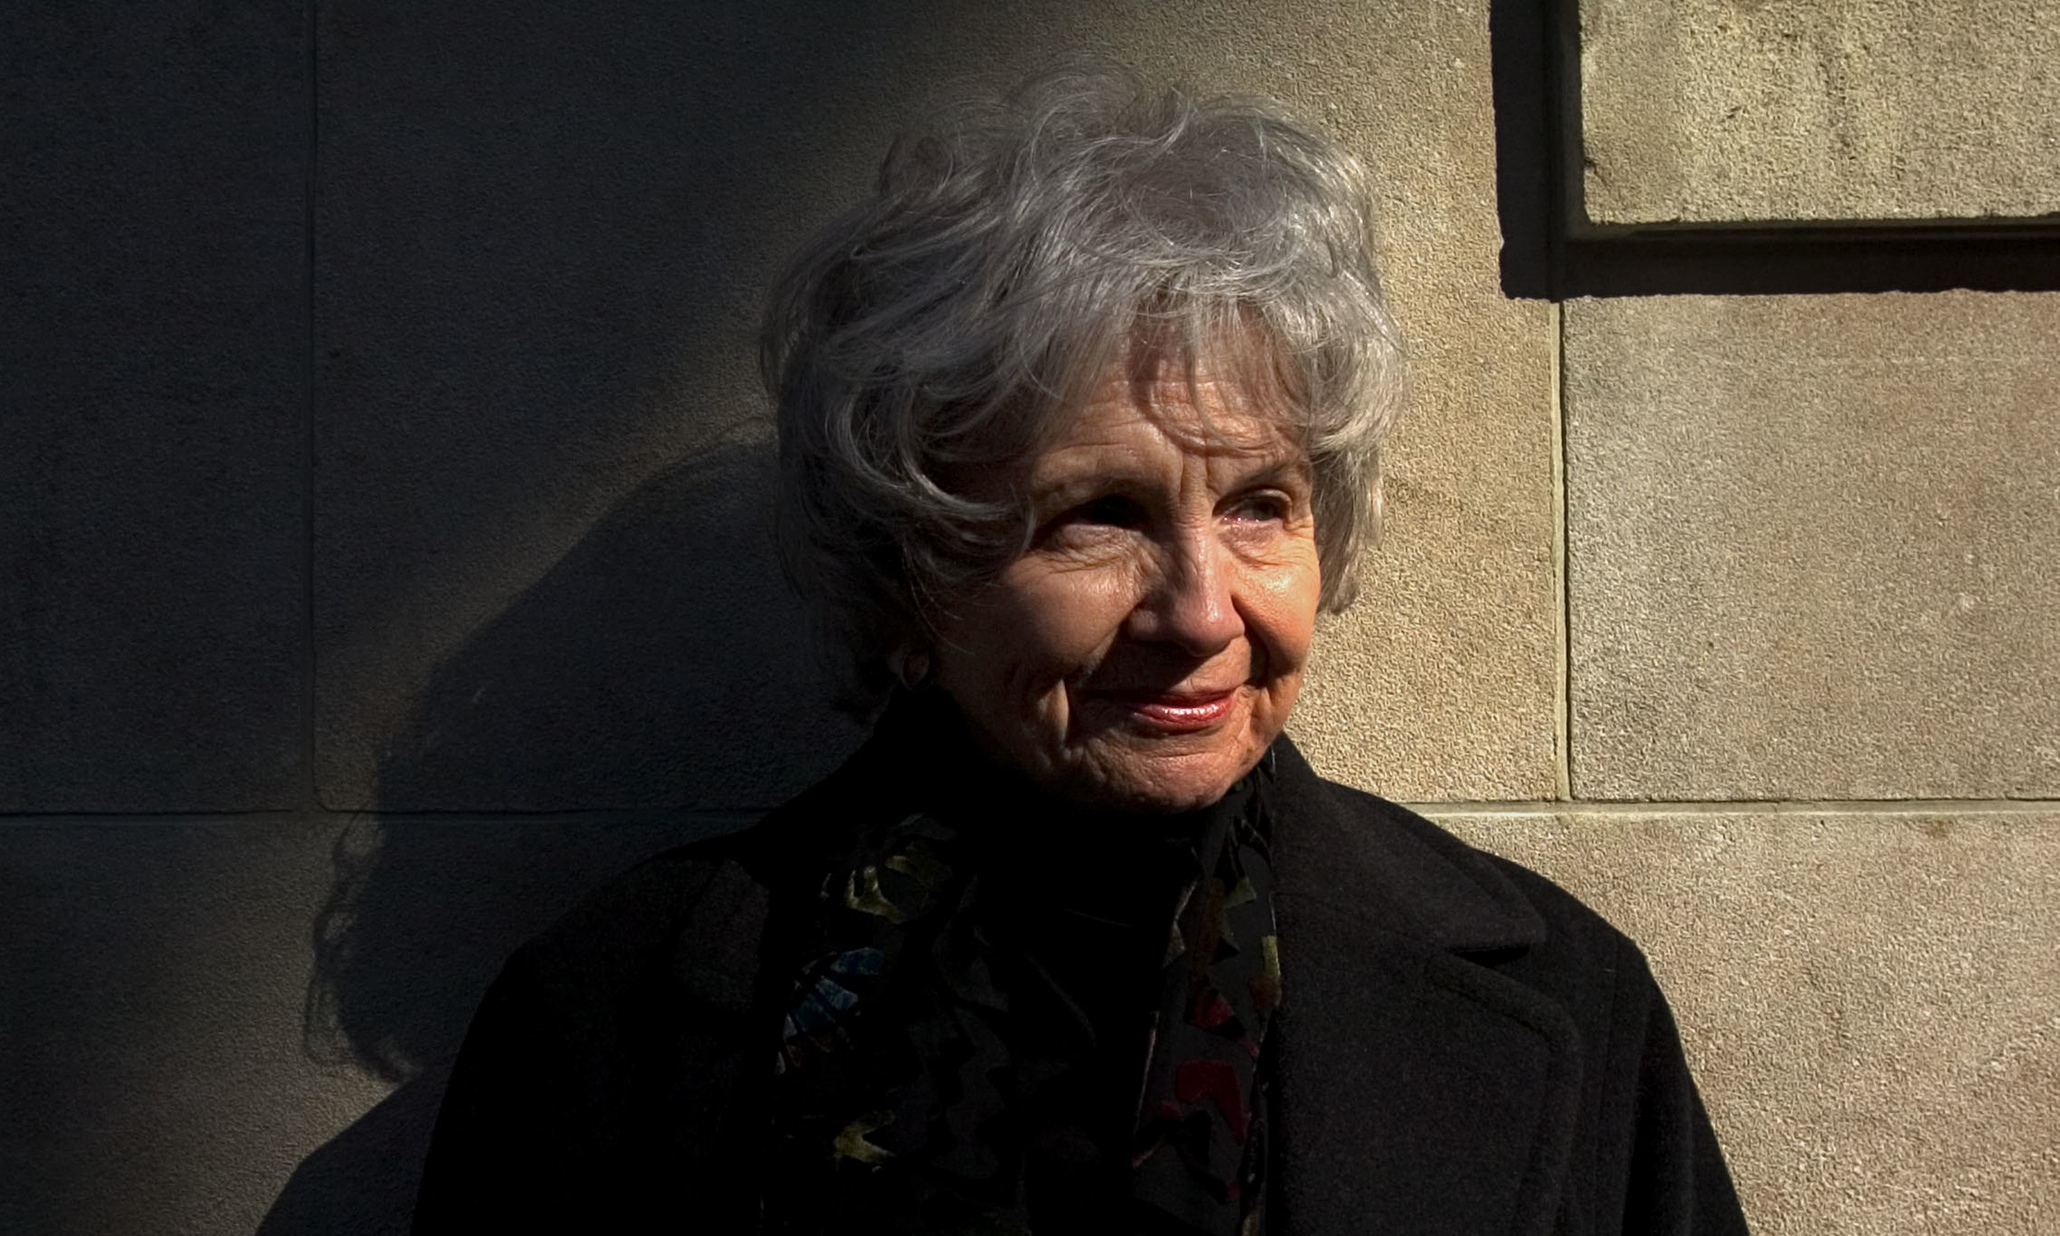 Lives of Girls and Women by Alice Munro